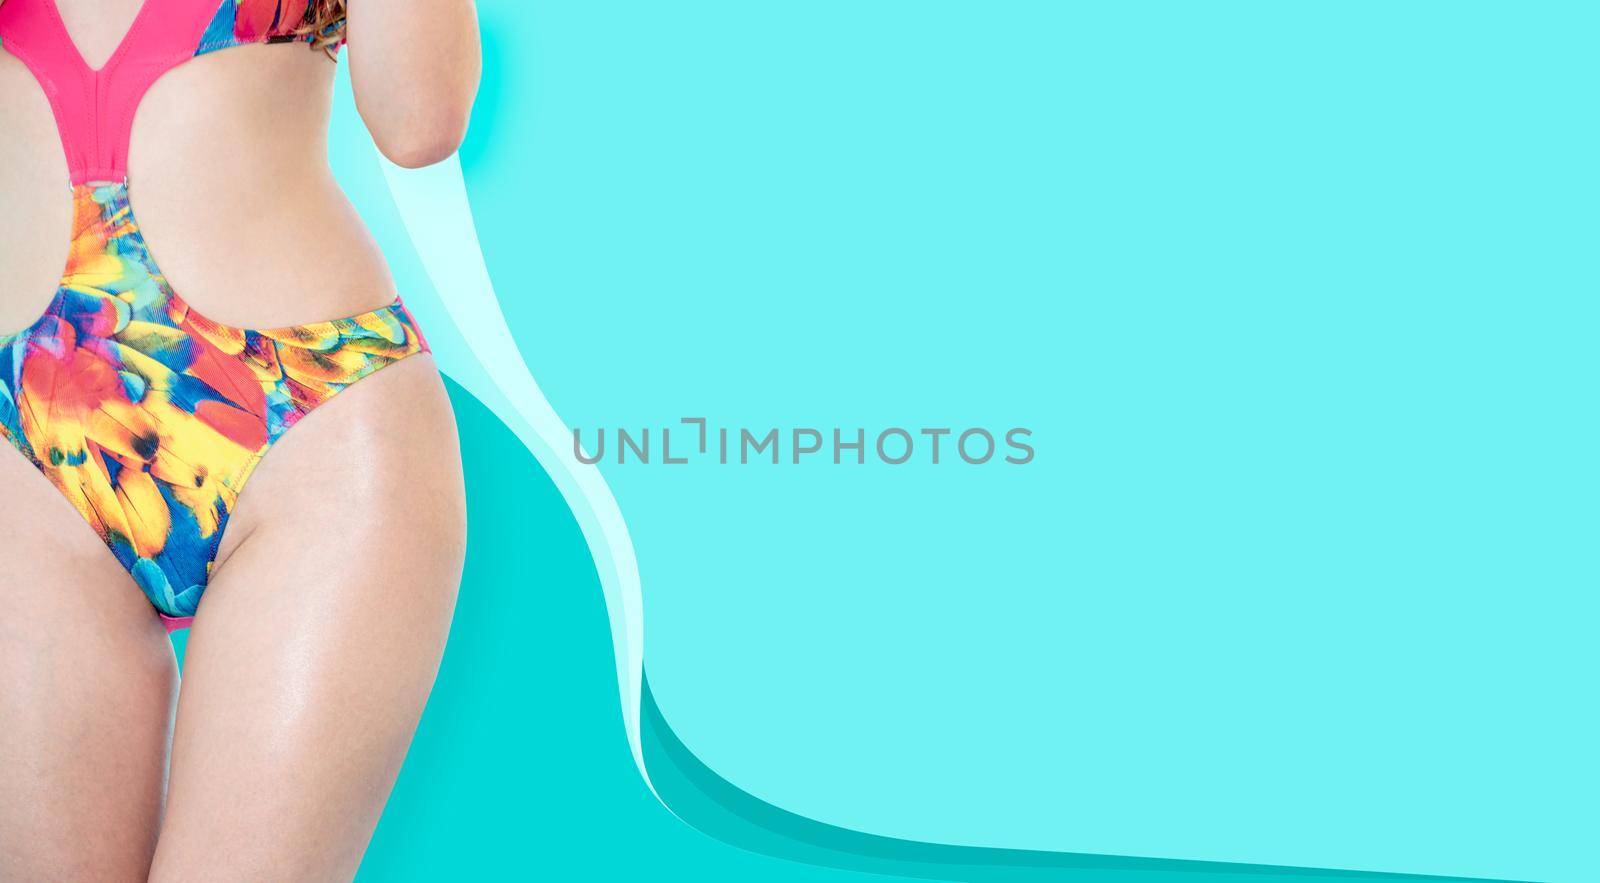 Woman in swimsuit posing on color background. by biancoblue